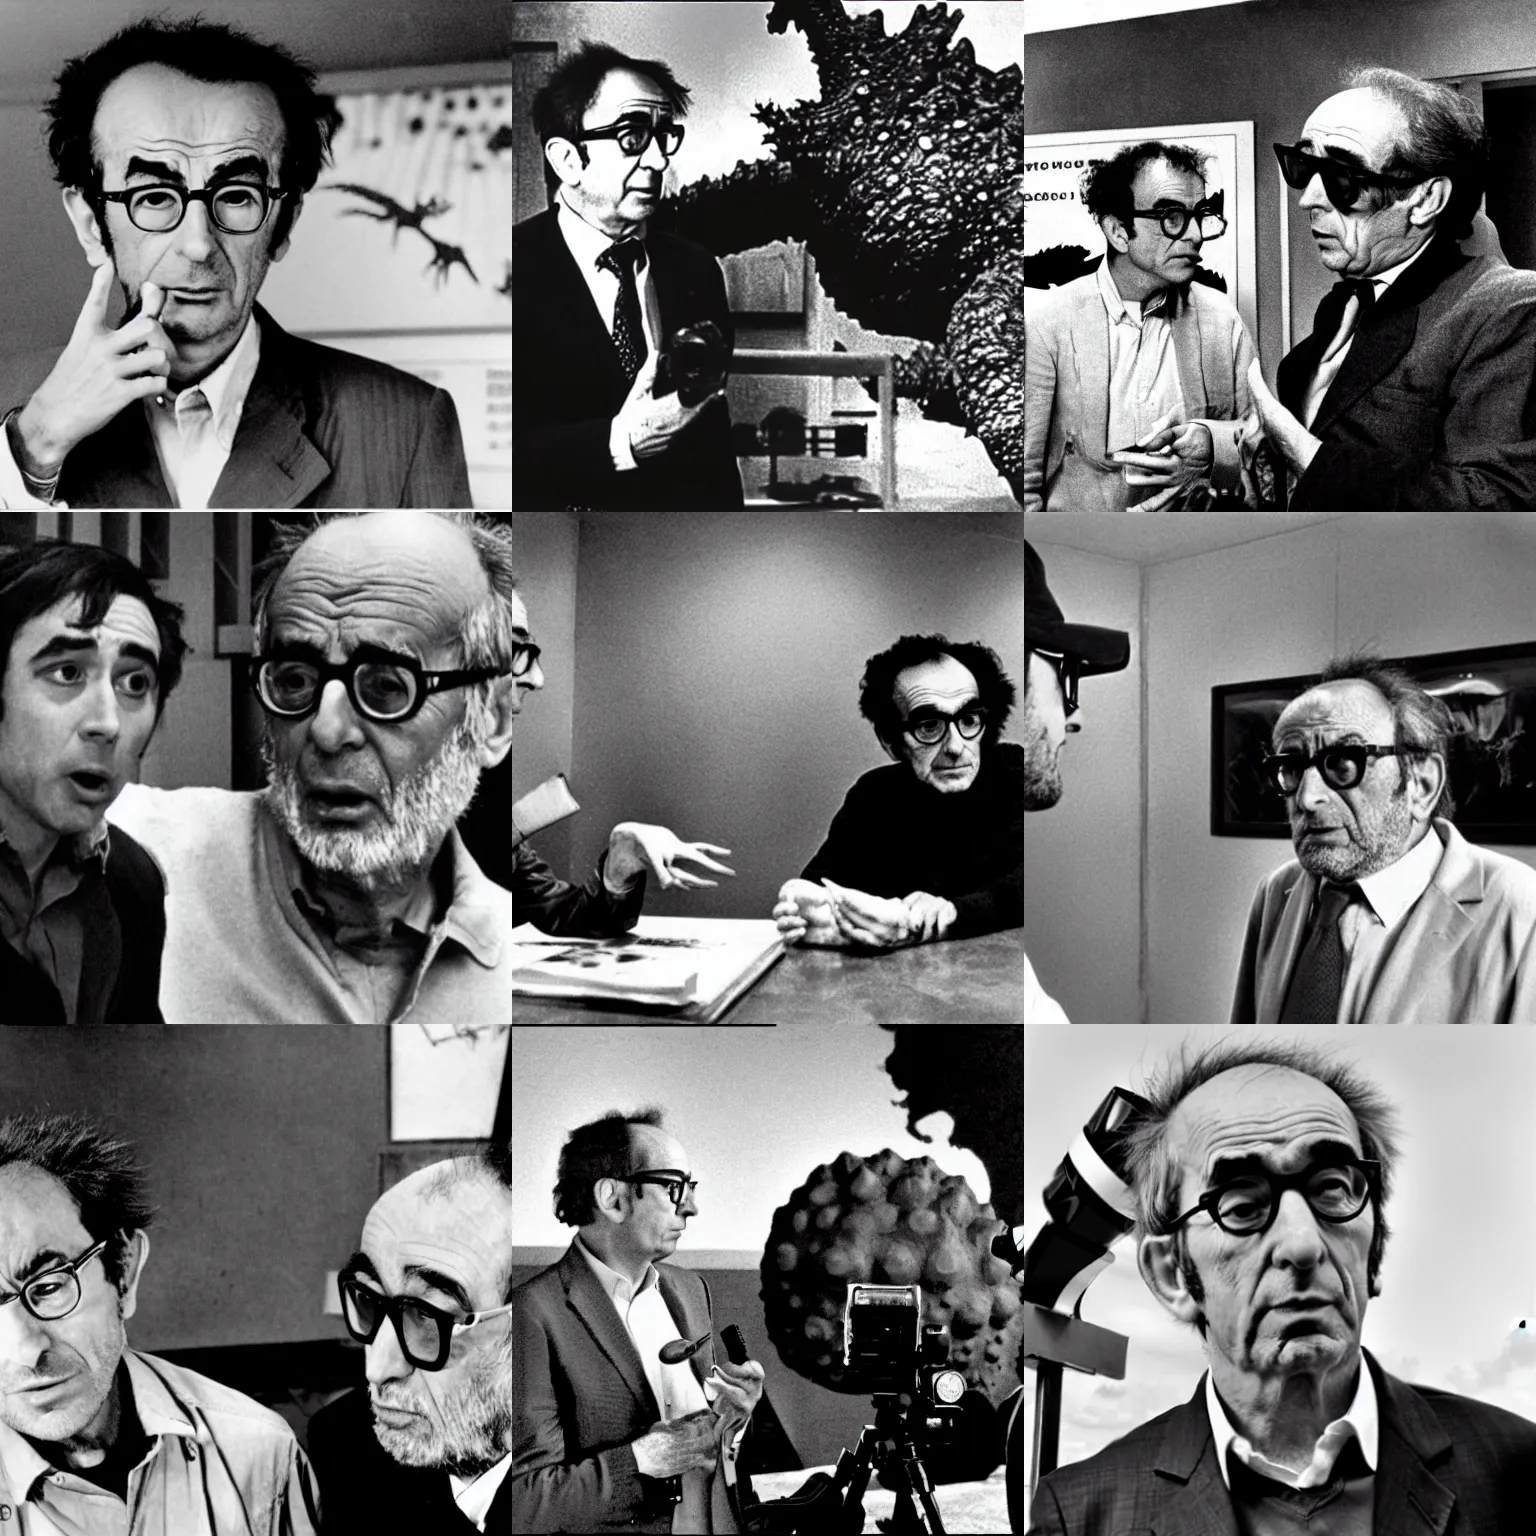 Prompt: jean - luc godard is interviewed with godzilla. godzilla is a big monster with scales